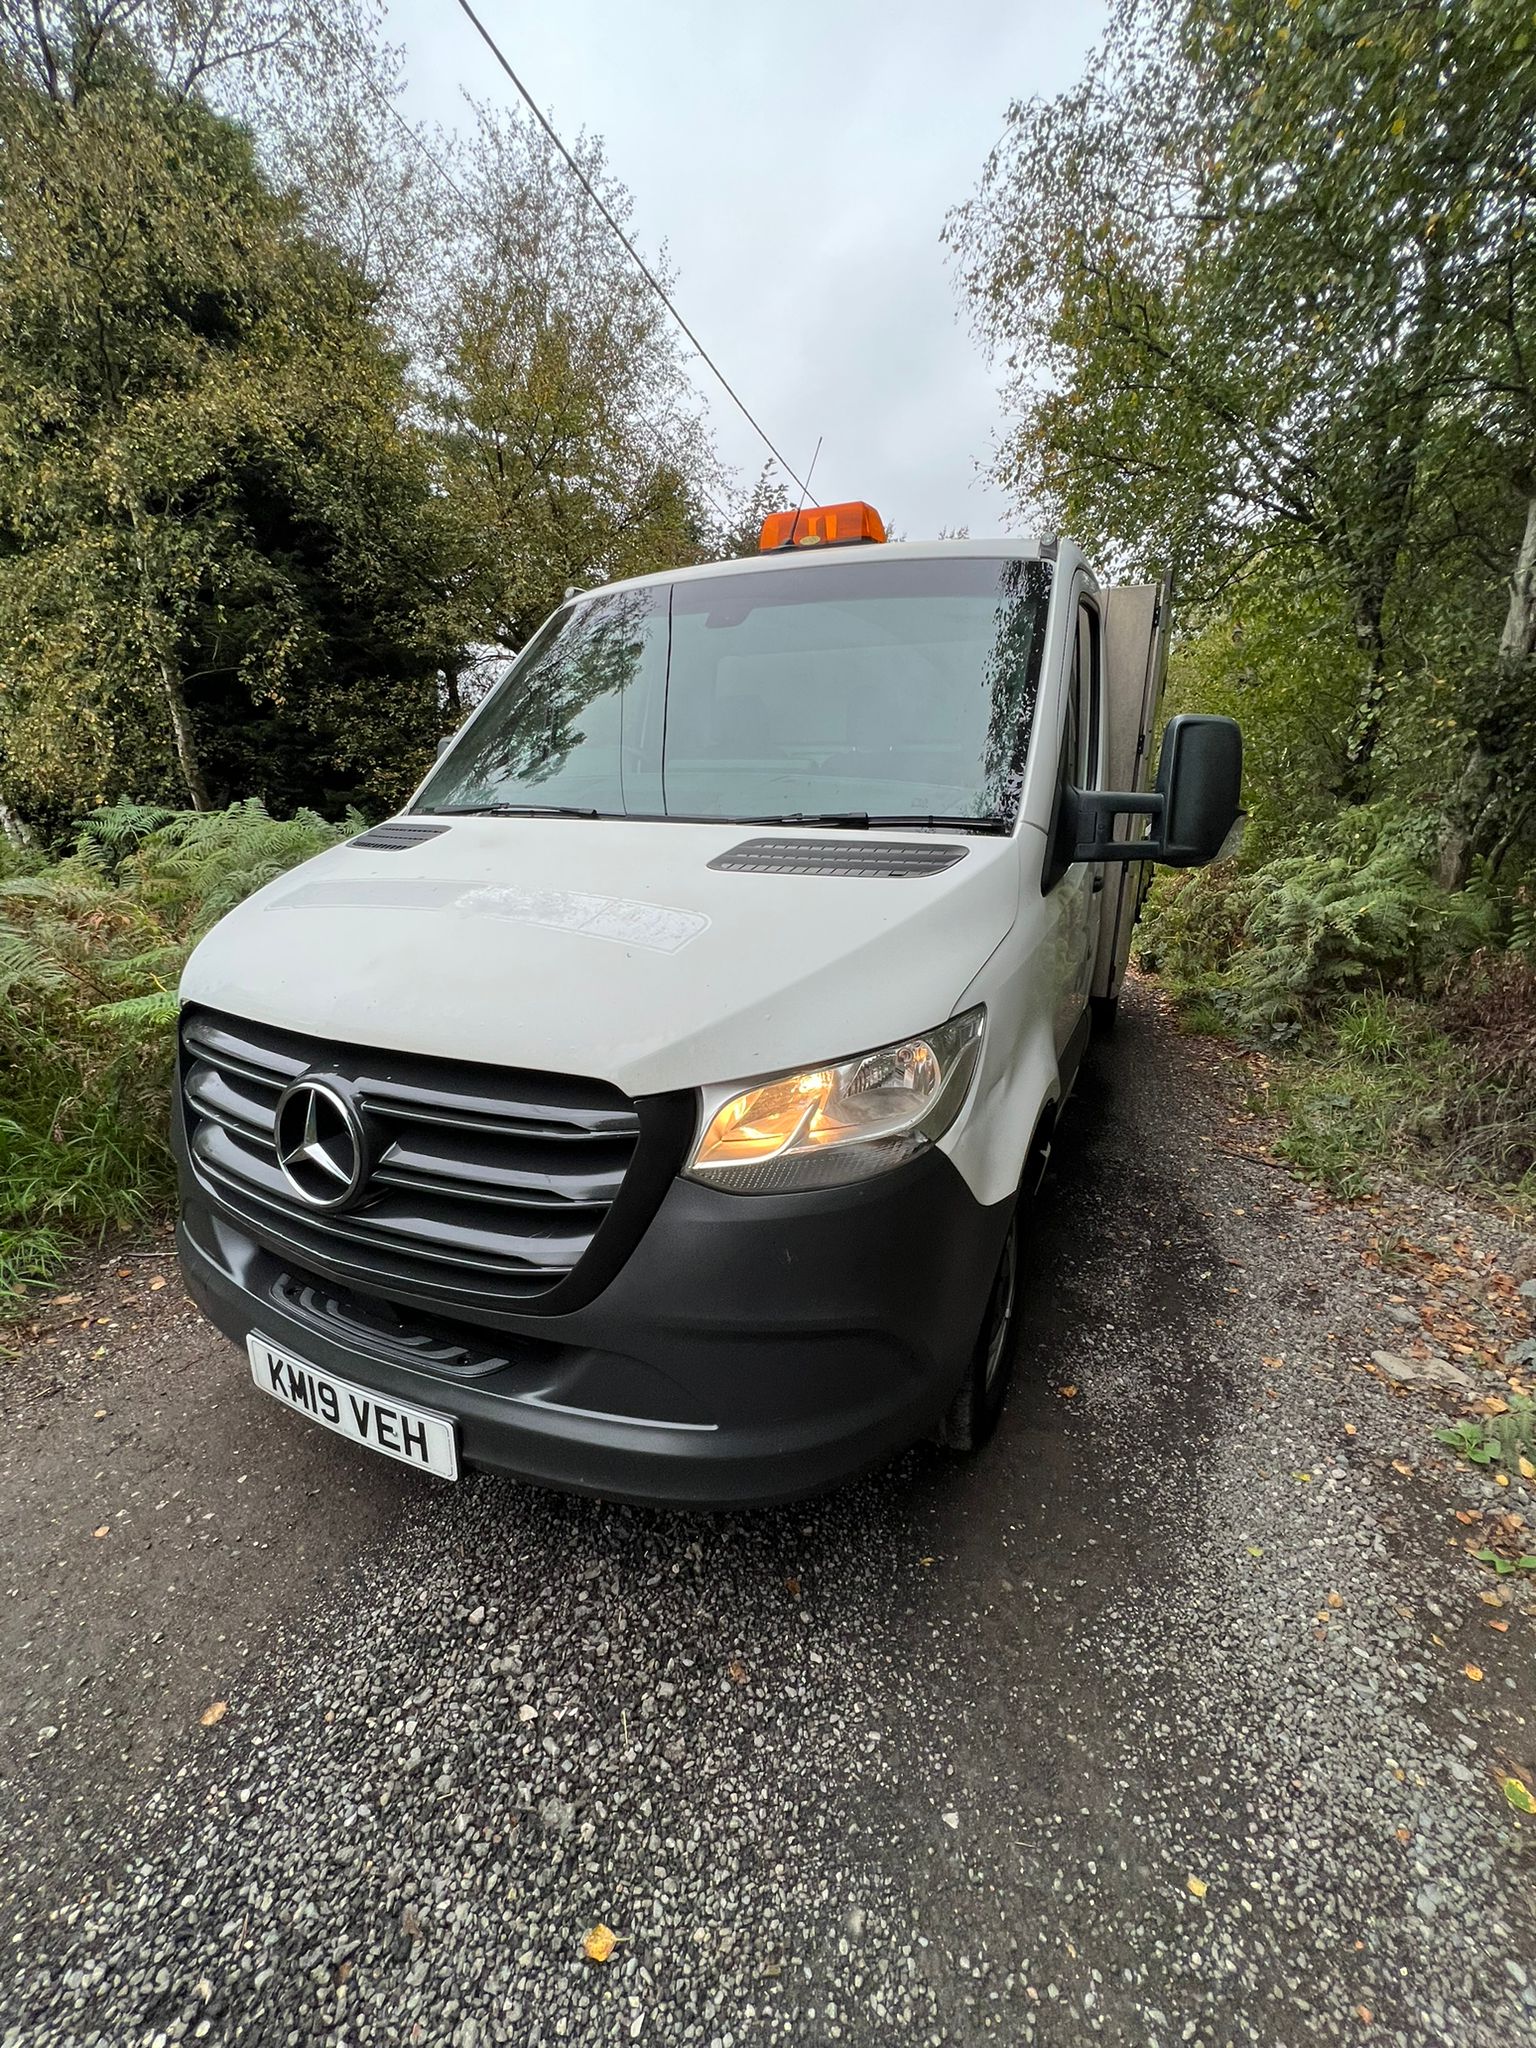 Bid on (*ONLY 120K MILES *)2019 MERCEDES SPRINTER TIPPER SINGEL CAB EURO6 MANUAL 6 SPEED- Buy &amp; Sell on Auction with EAMA Group